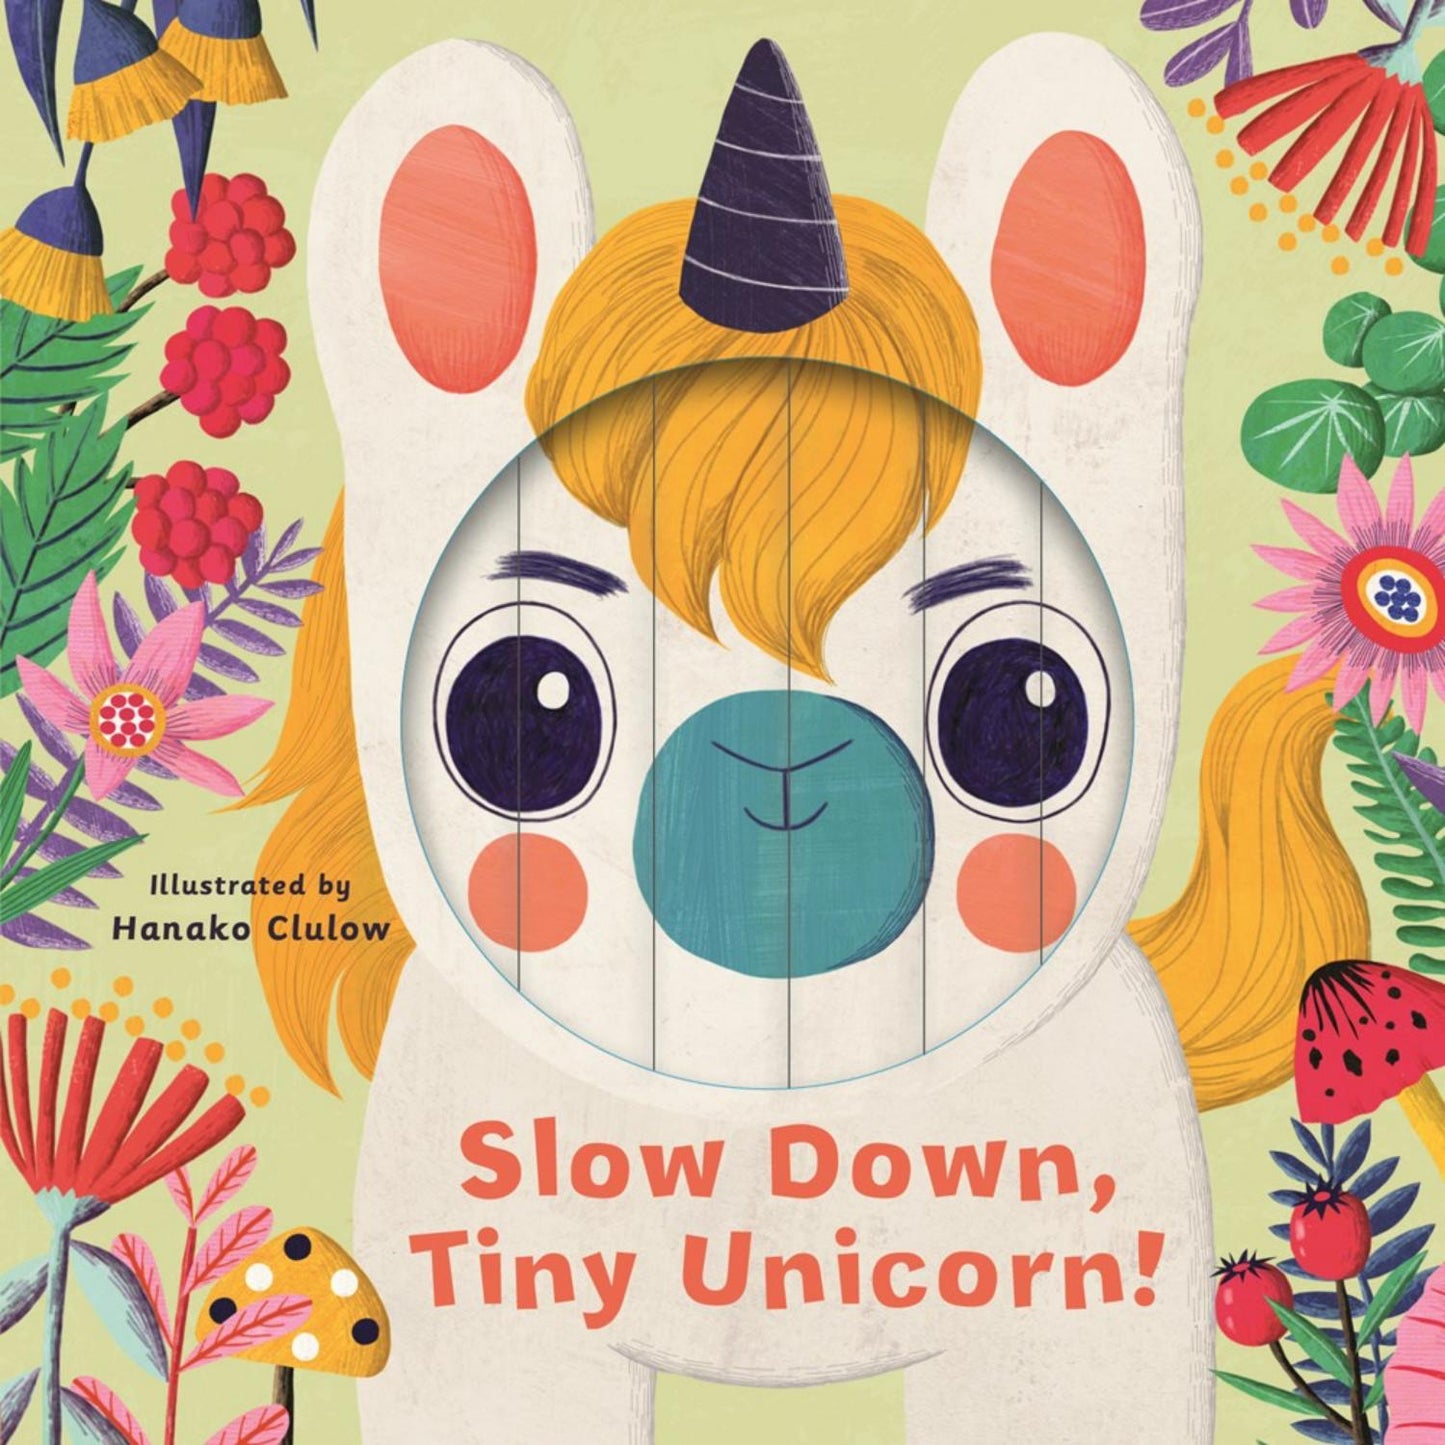 Slow Down, Tiny Unicorn!  - Little Faces Series | Interactive Board Book for Babies & Toddlers